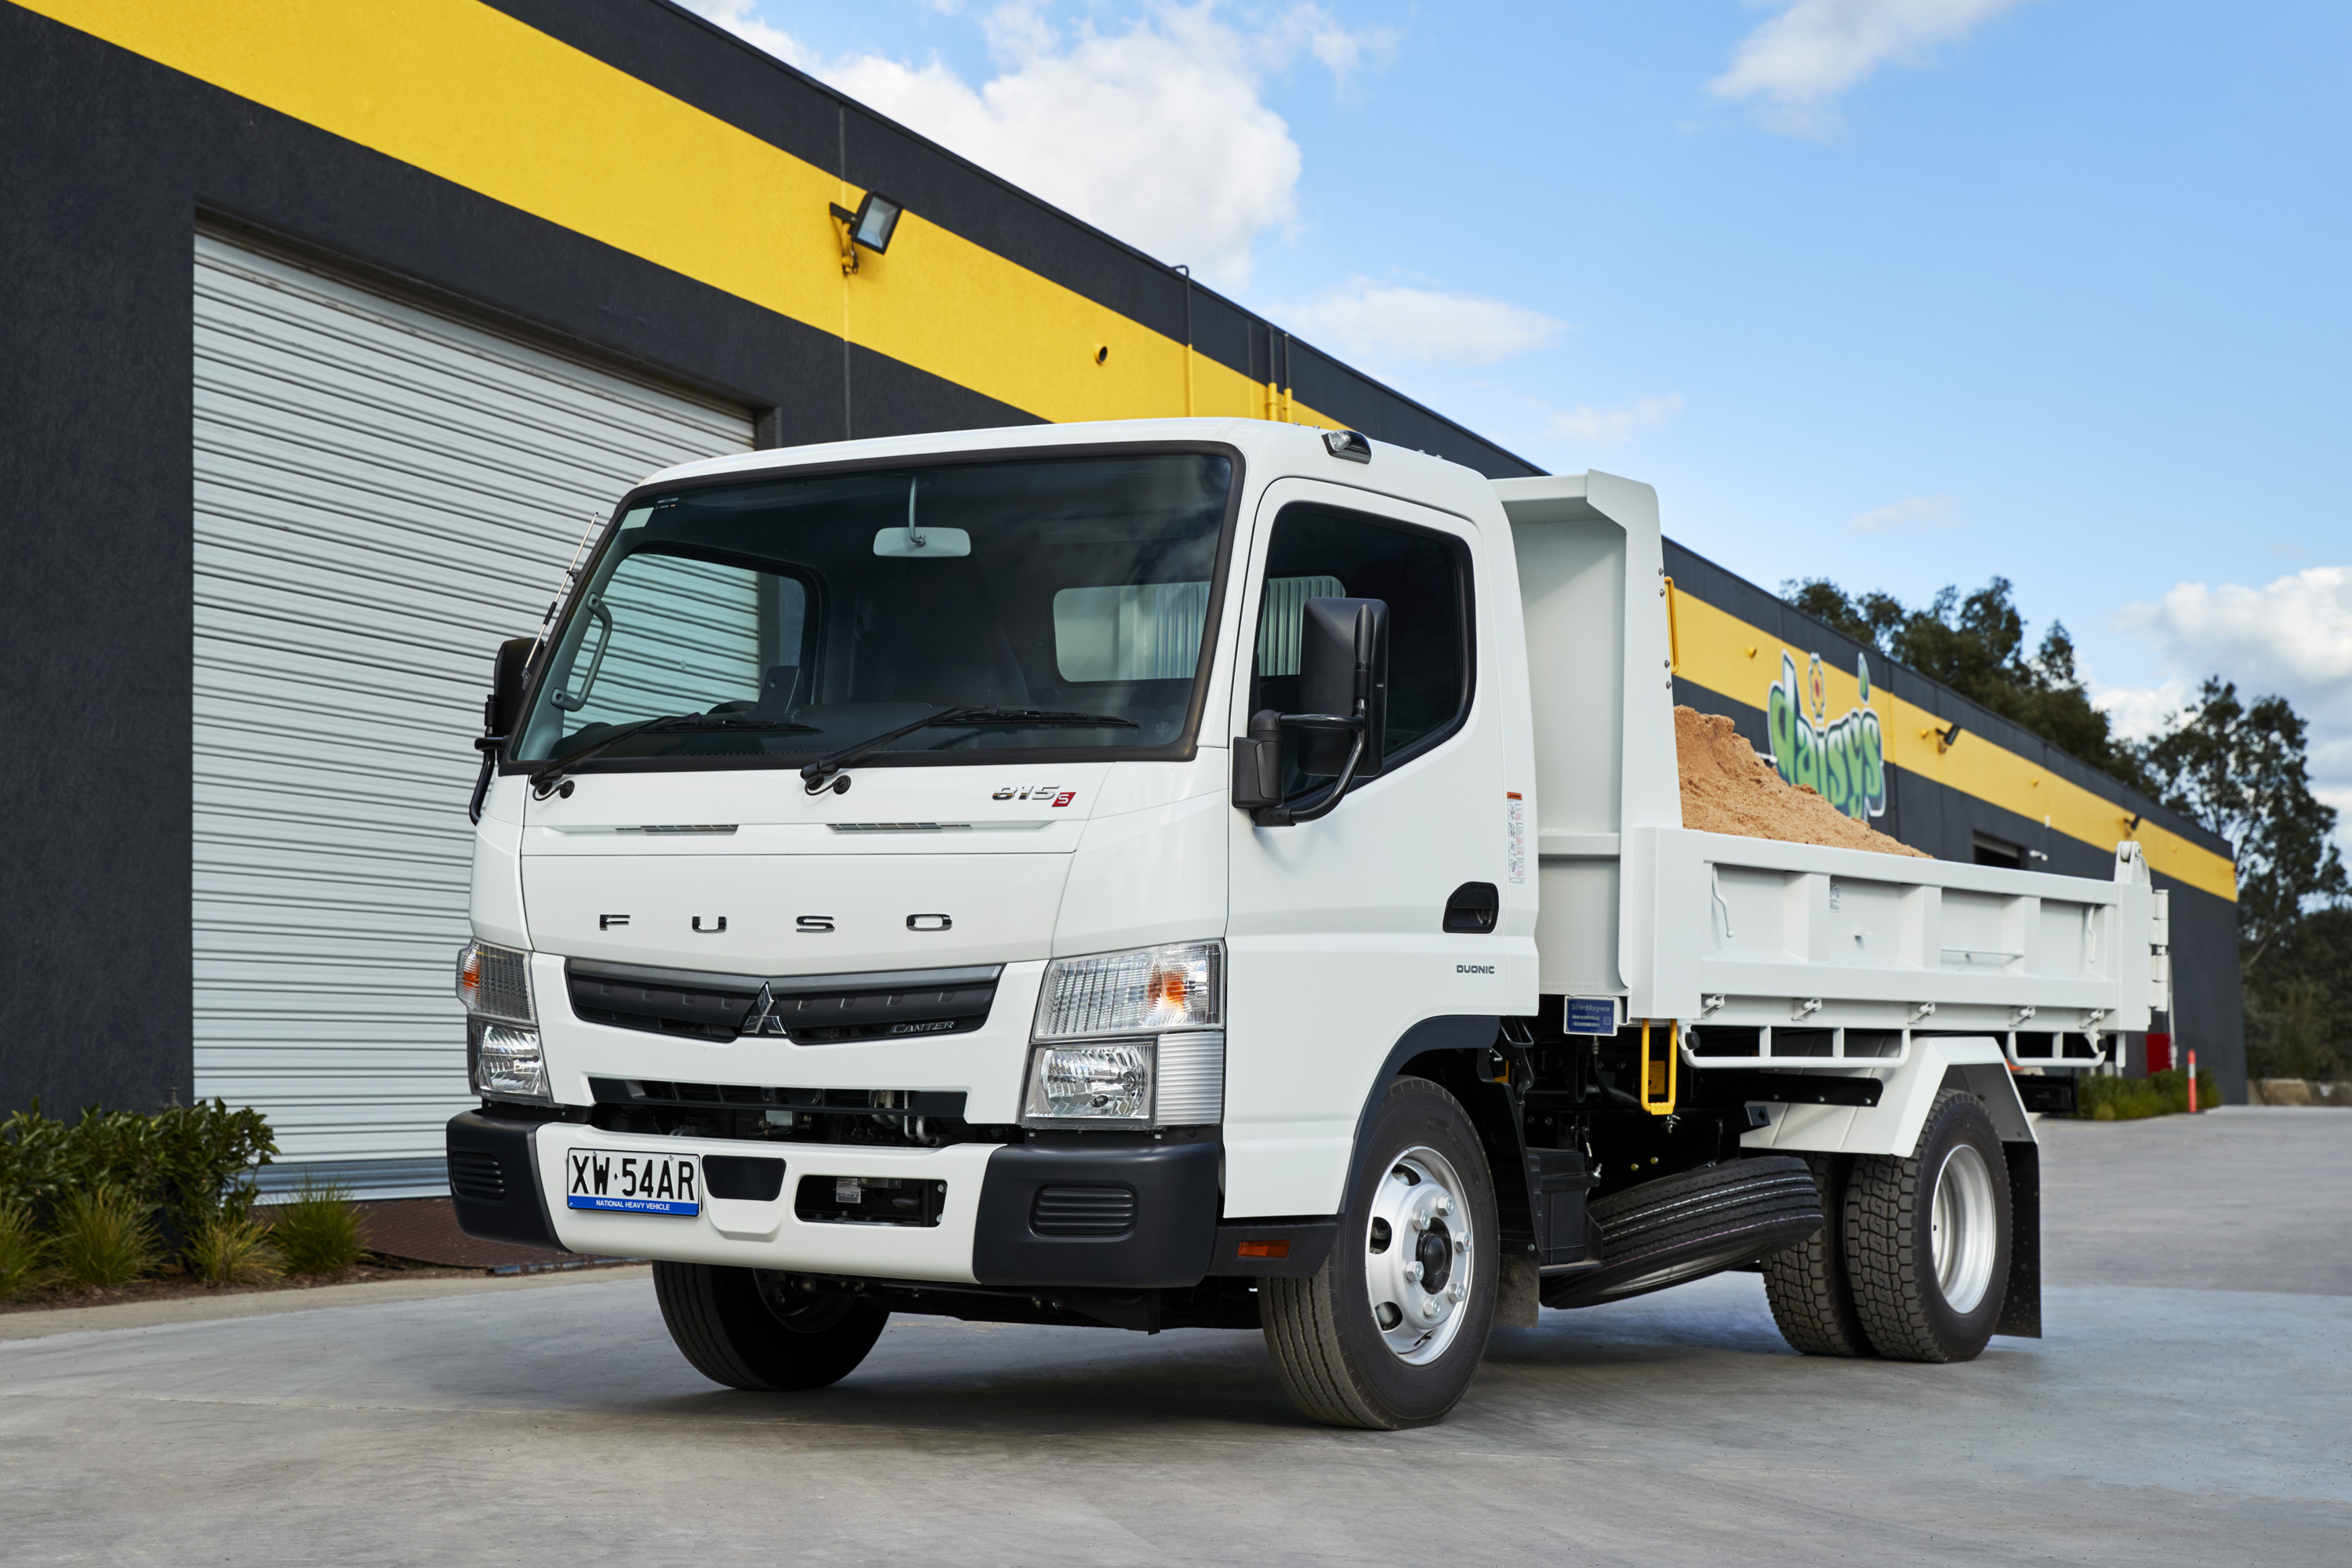 Fuso notches second record year of sales as supply improves